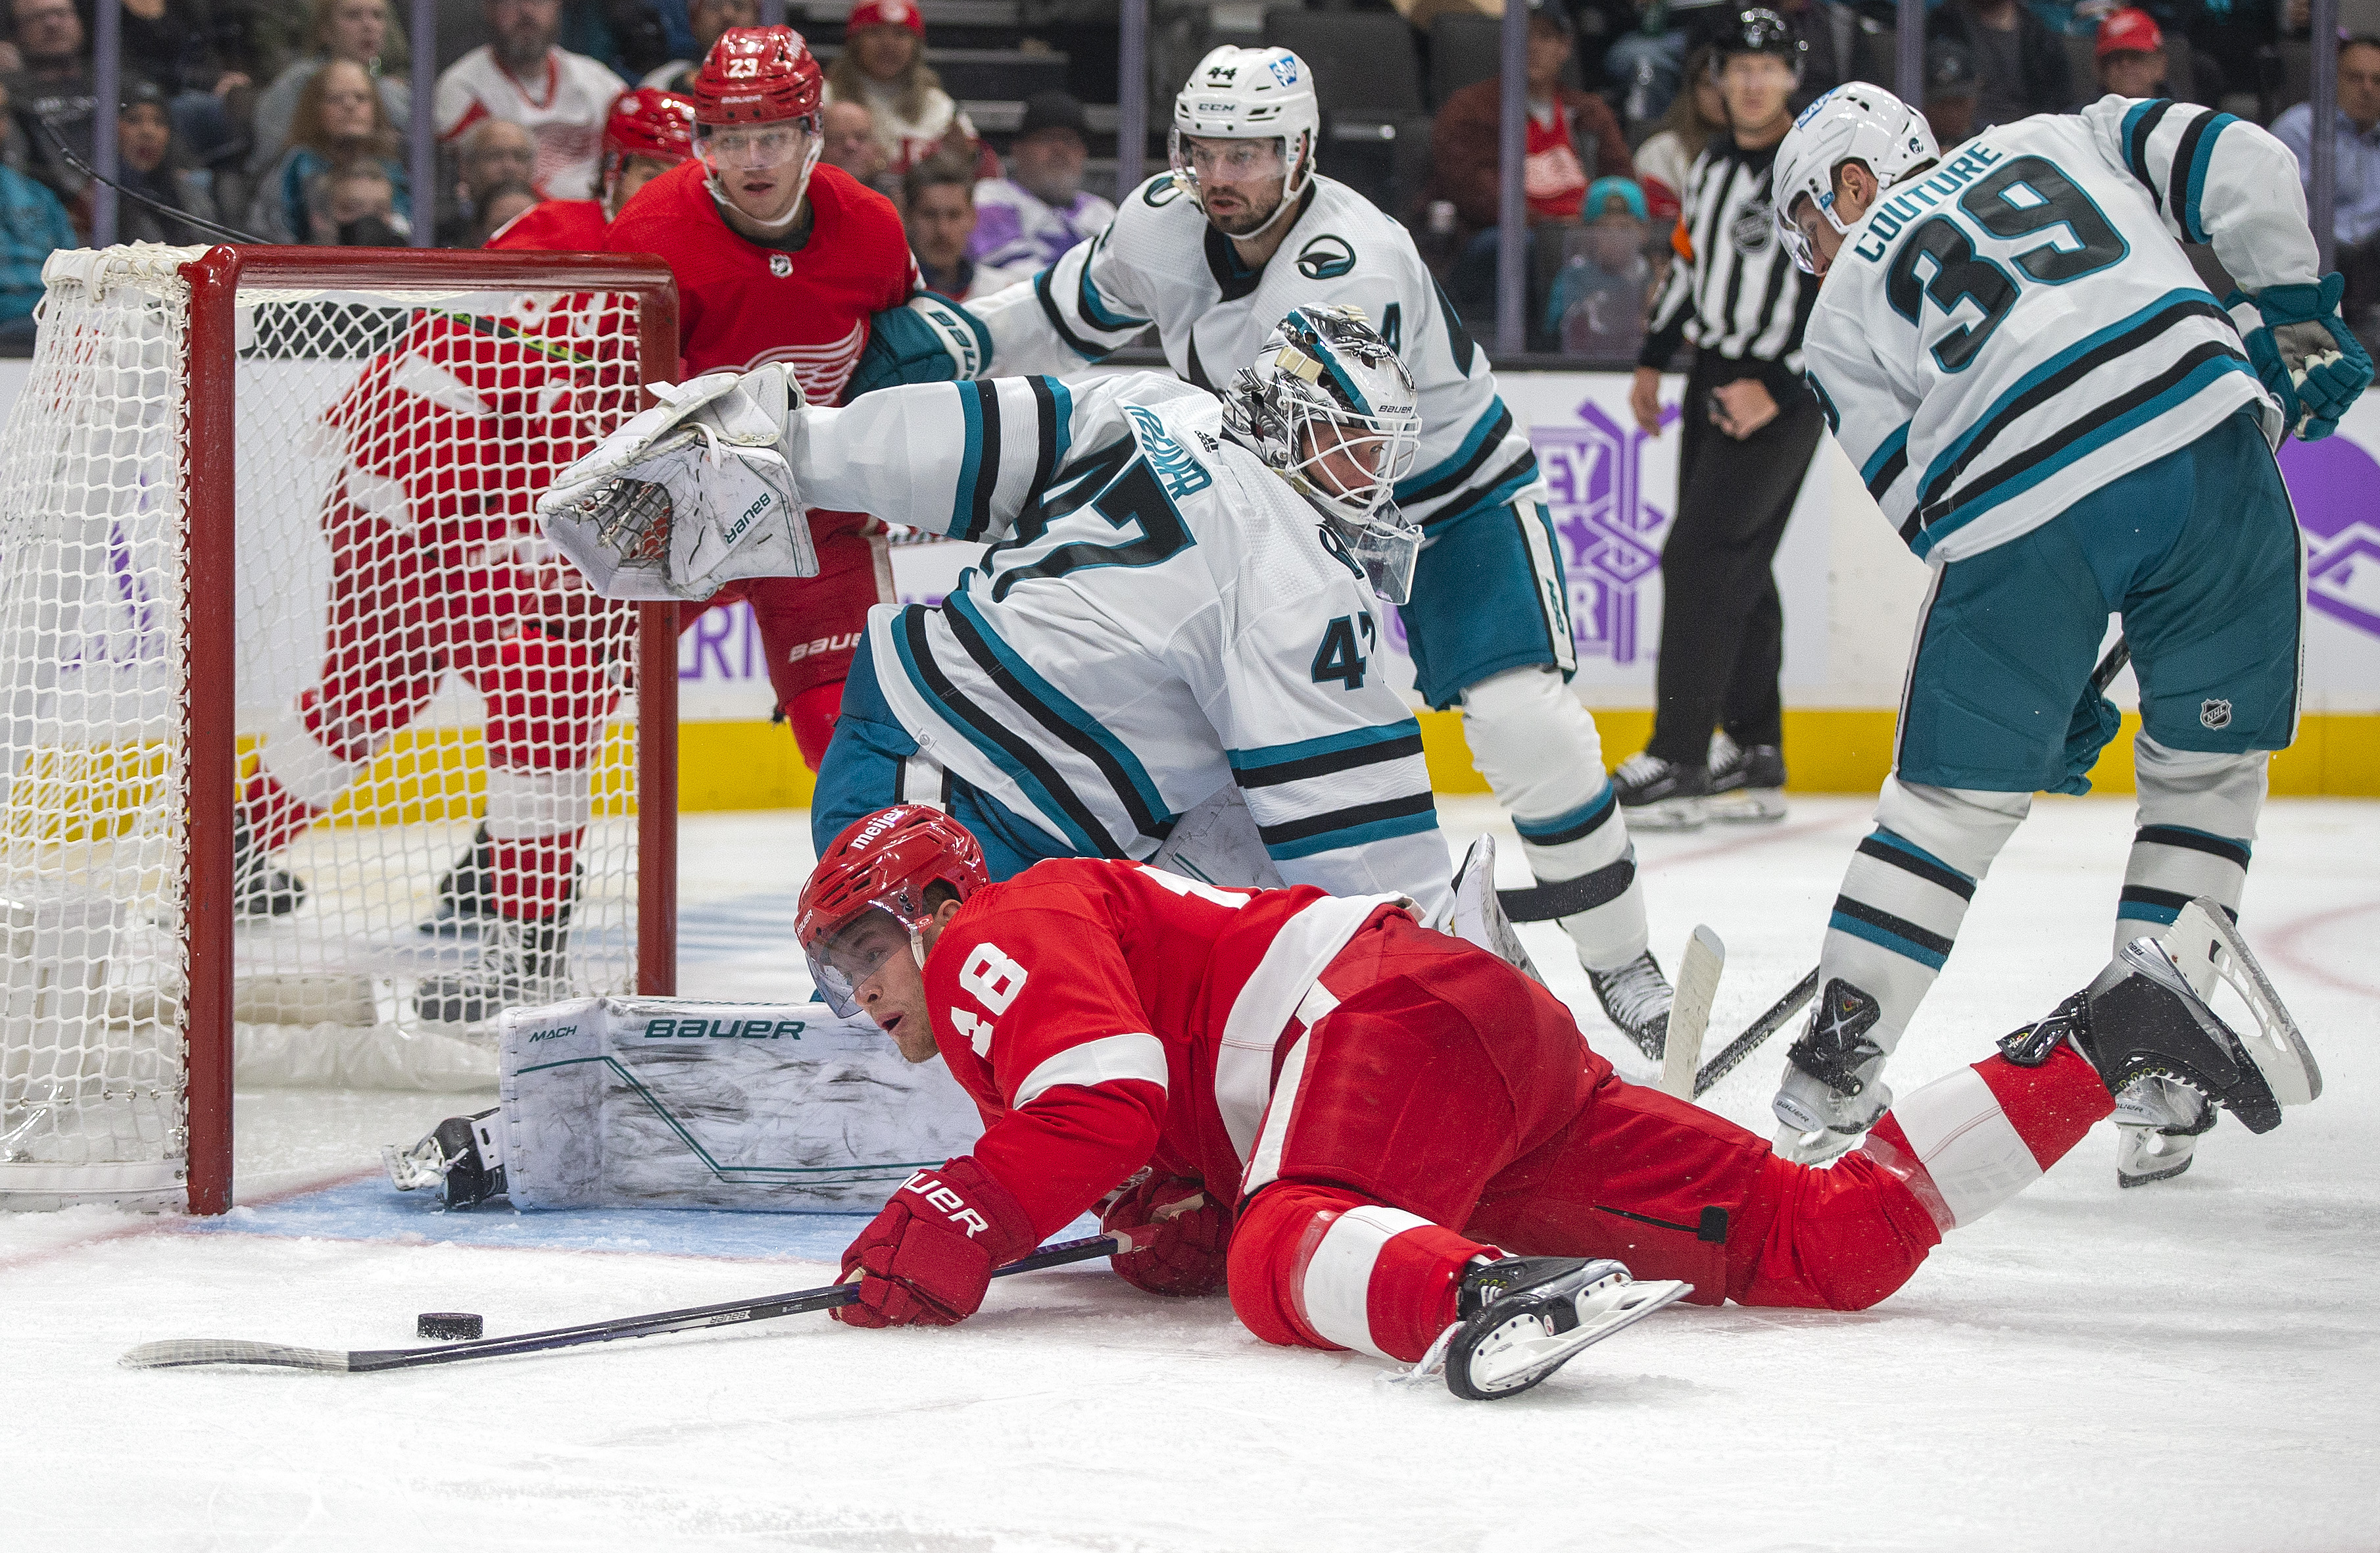 SAN JOSE, CA - NOVEMBER 17: Detroit Red Wings Center Andrew Copp (18) tries to move the puck past San Jose Sharks Goalie James Reimer (47) into the goal during the third period of a regular season NHL hockey game between the Detroit Red Wings and the San Jose Sharks on November 17, 2022, at SAP Center, in San Jose, CA.